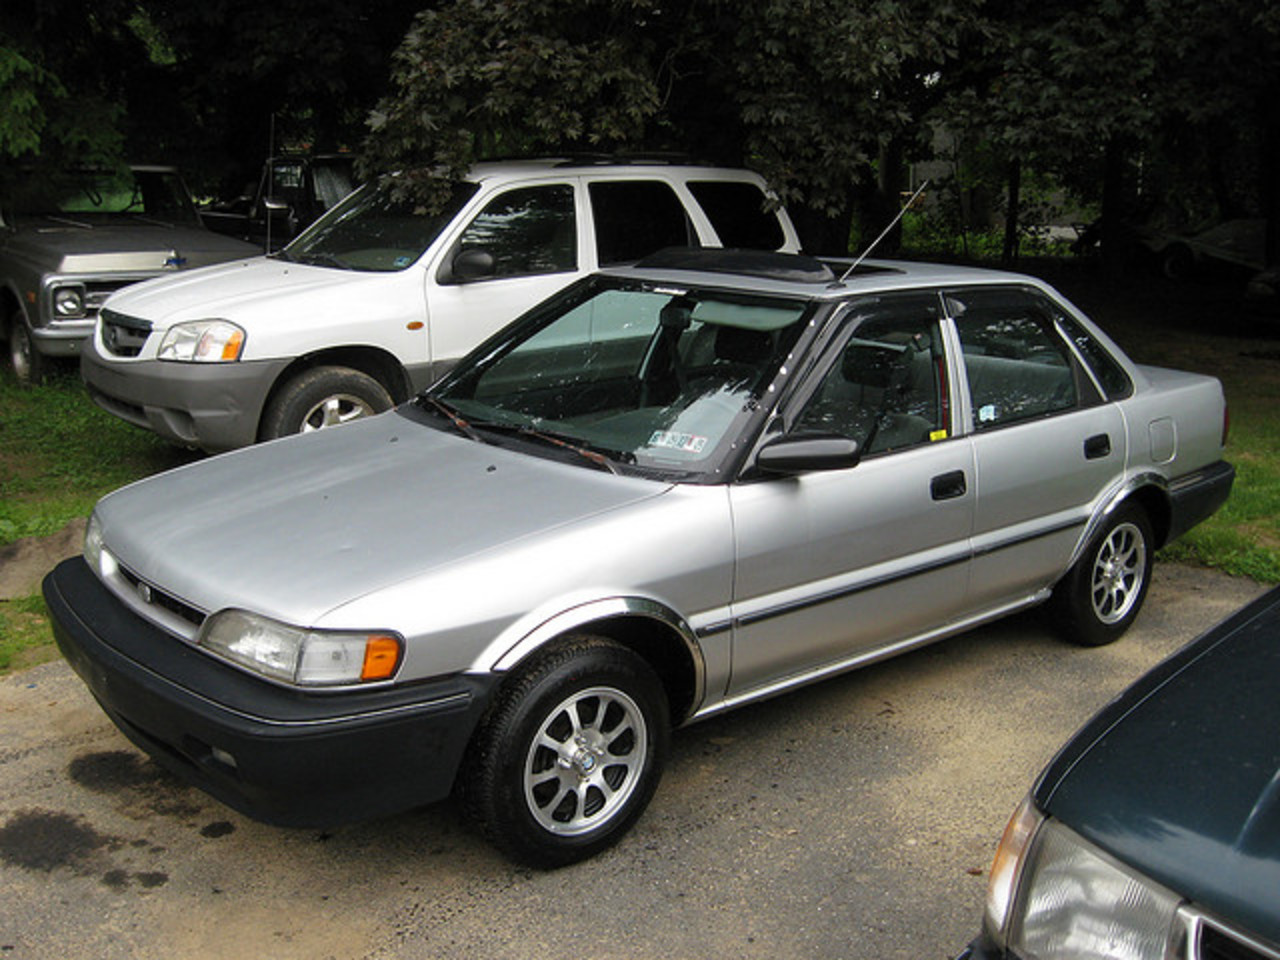 1991 Geo Prizm Daily Driver | Flickr - Photo Sharing!